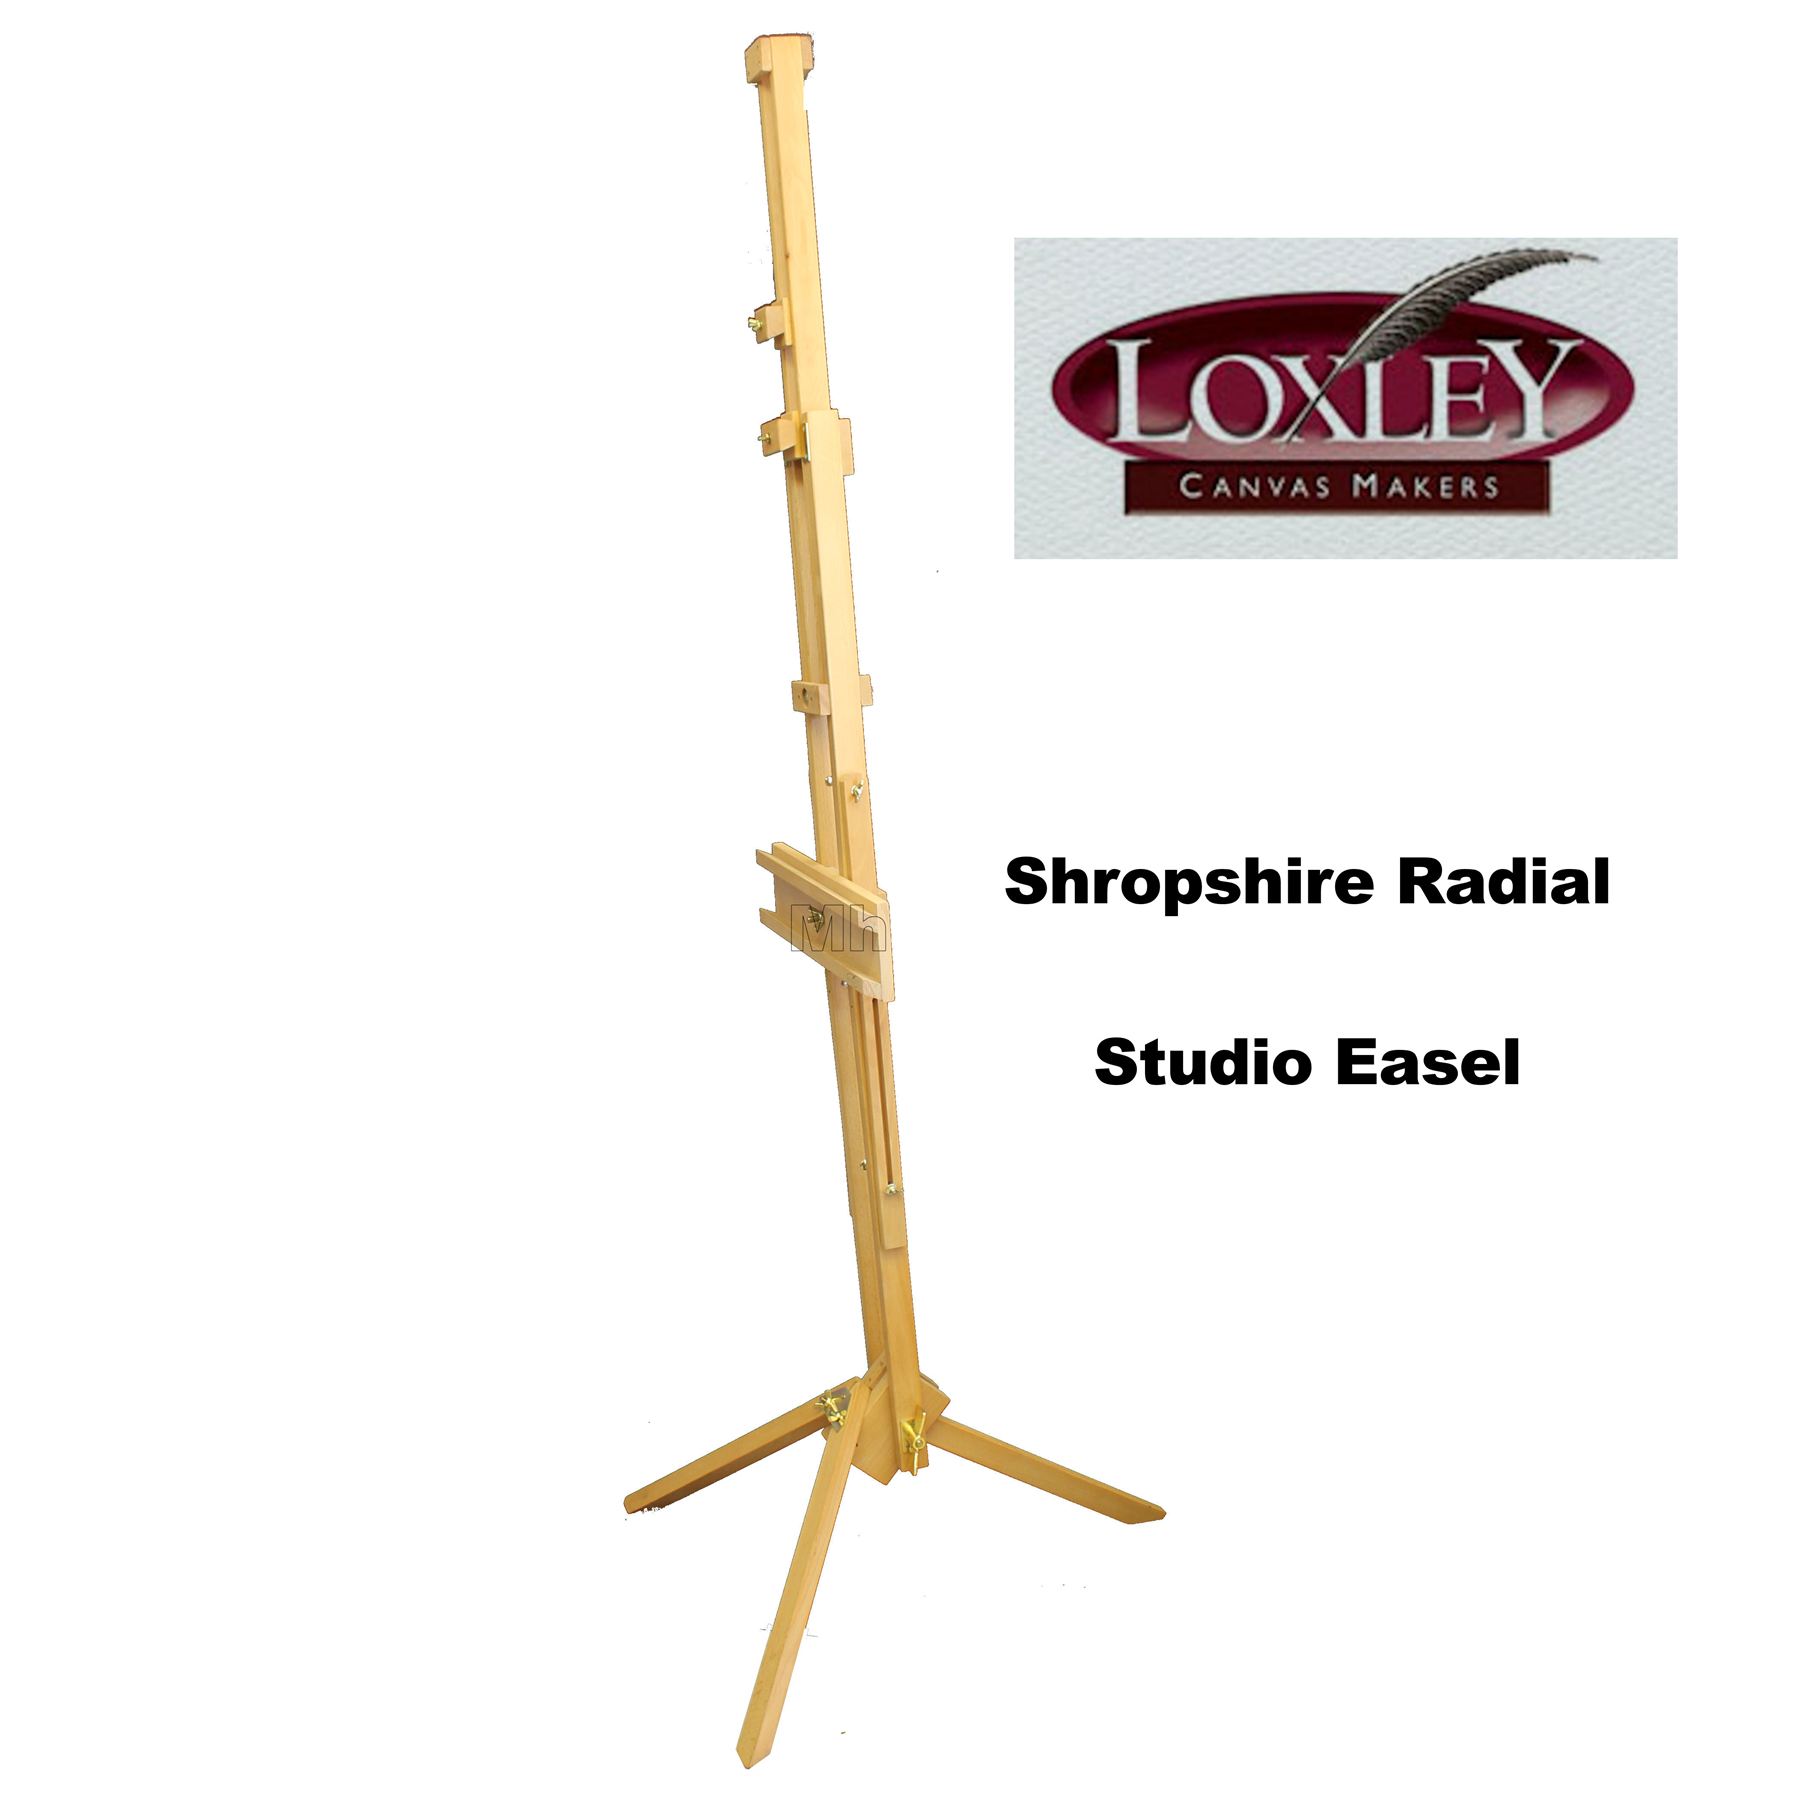 Loxley Shropshire Radial Studio Painting and Drawing Artists Wooden Easel EL-690